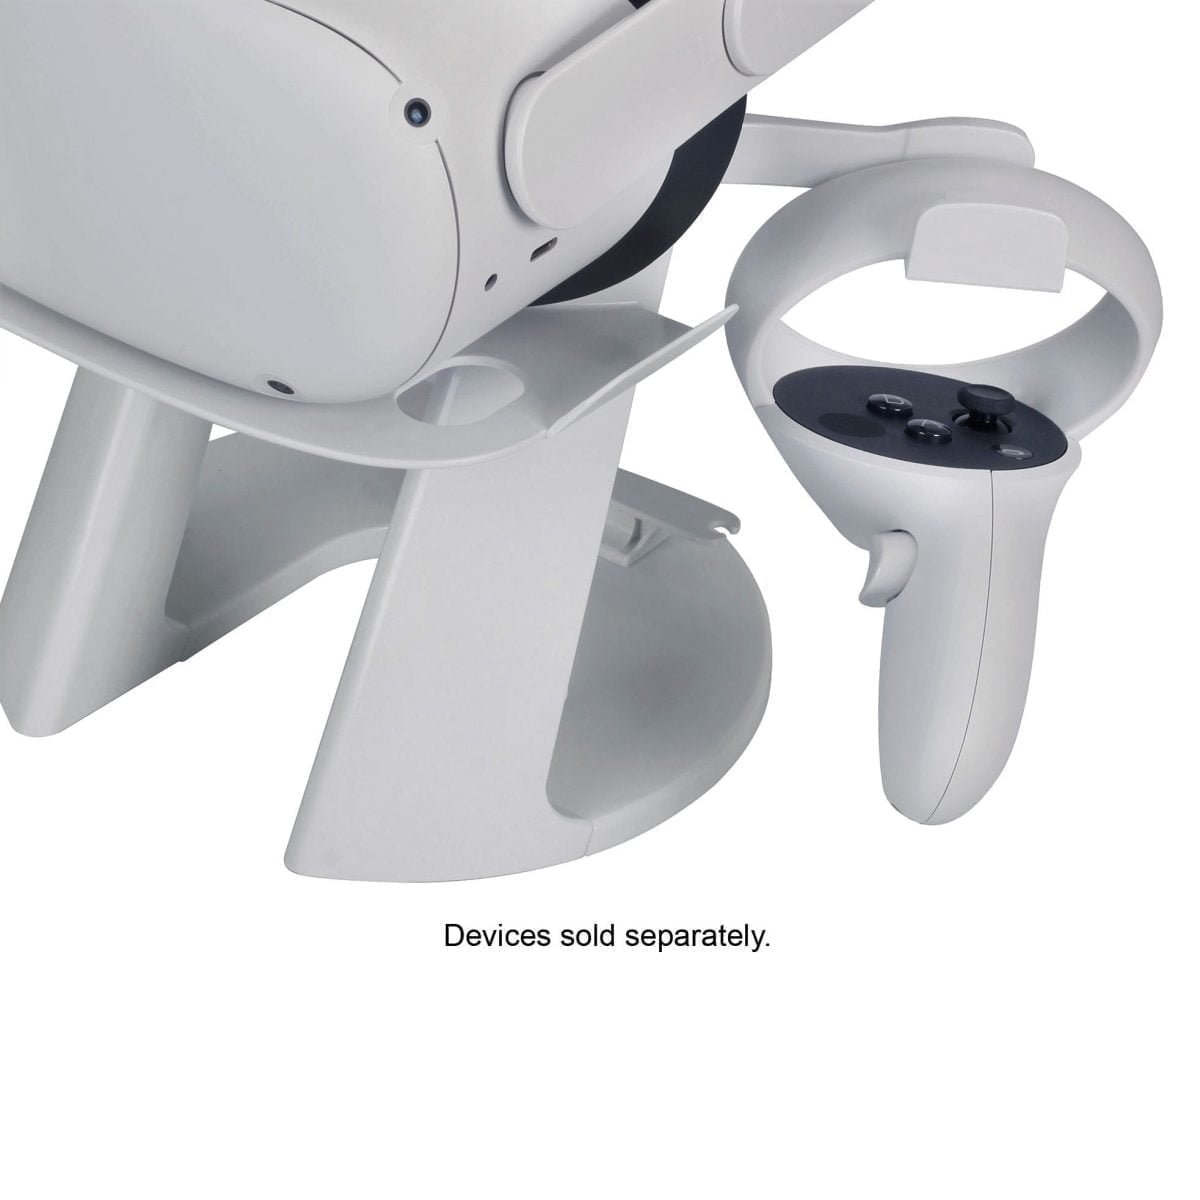 6473847Cv15D &Lt;H1&Gt;Stand For Oculus - White&Lt;/H1&Gt; The Insignia Oculus Stand Is Specially Designed For Displaying And Storing Your Oculus Vr Headset And Touch Controllers. Built With A No-Slip Base, This Stand Is A Safe And Stable To Place To Store And Organize Your Vr Headset, Controllers And Cables. Compatible With Most Vr Systems Including The Oculus Series (Oculus Rift/Rift S/Quest/Quest 2) Vr Headset And Controllers Oculus Stand Insignia Stand For Oculus - White